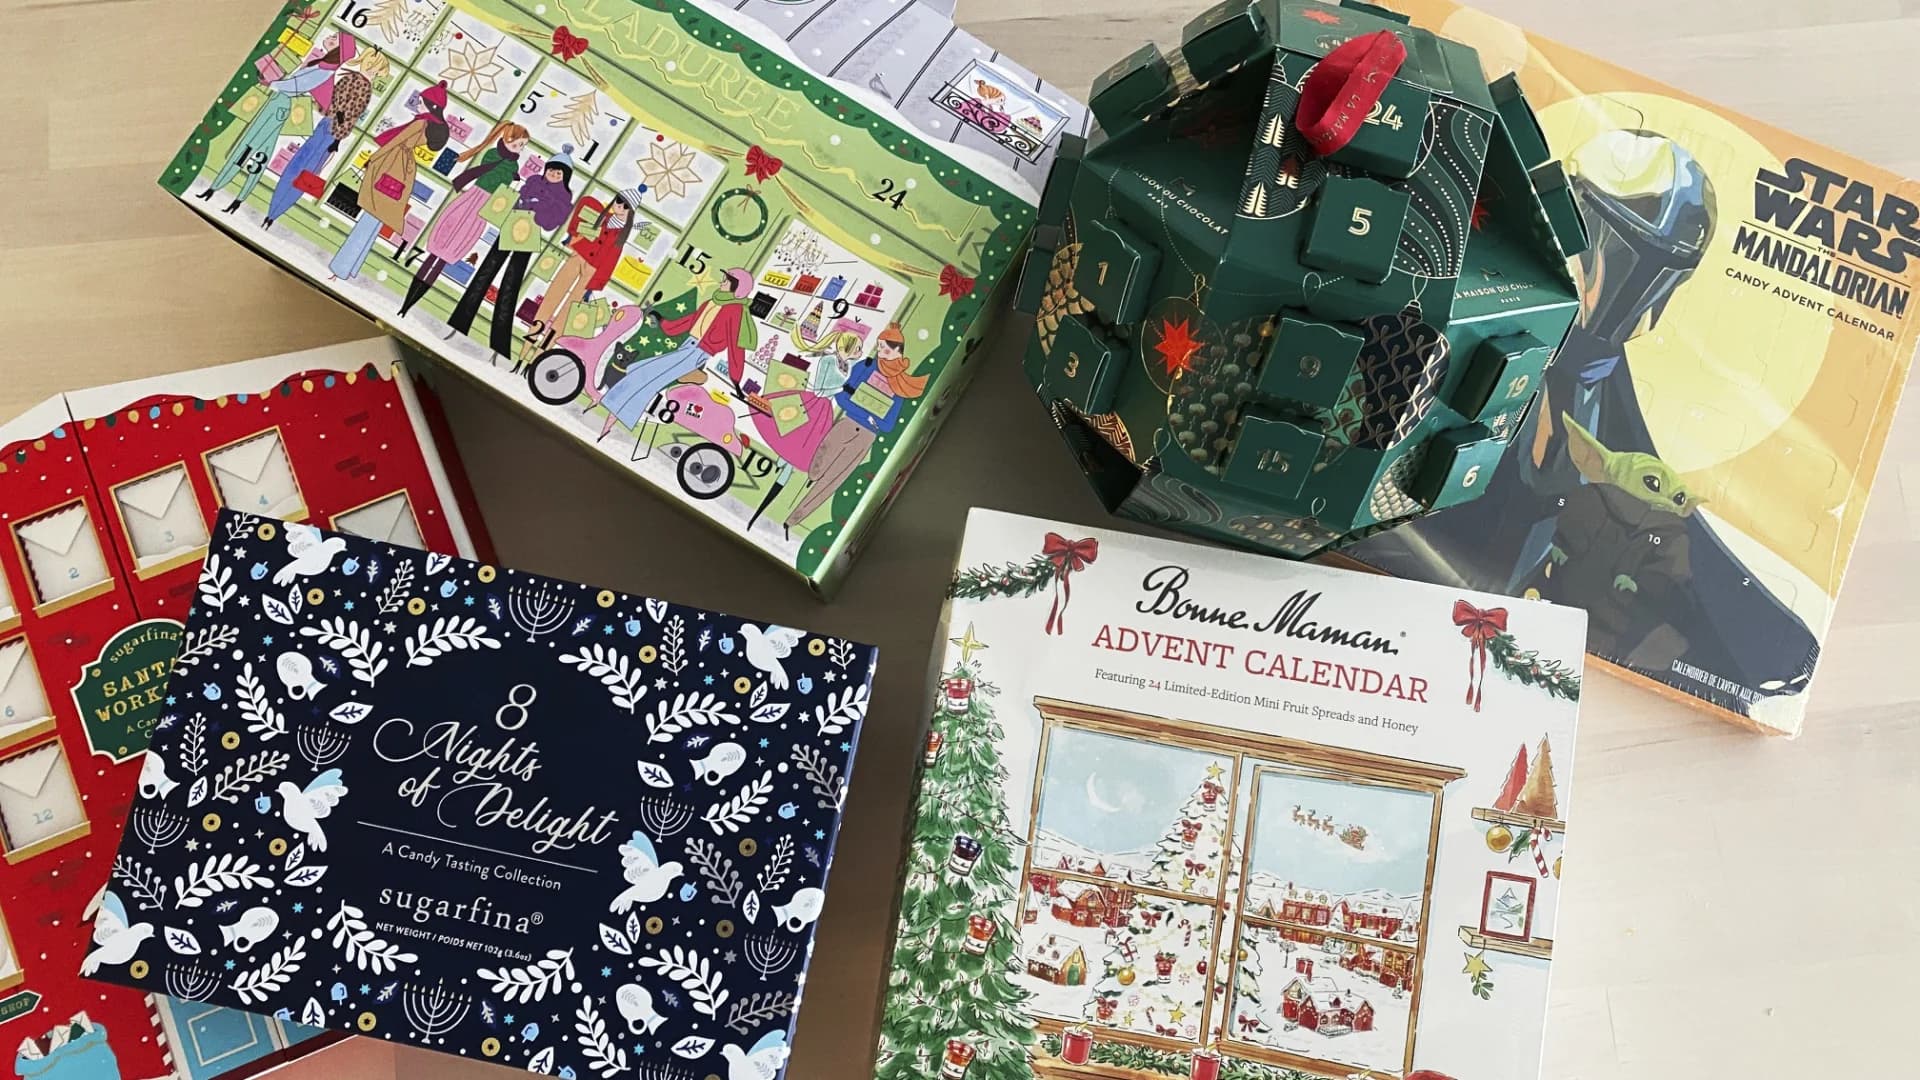 Ready to count down in style? Here's what's new in Advent calendars.